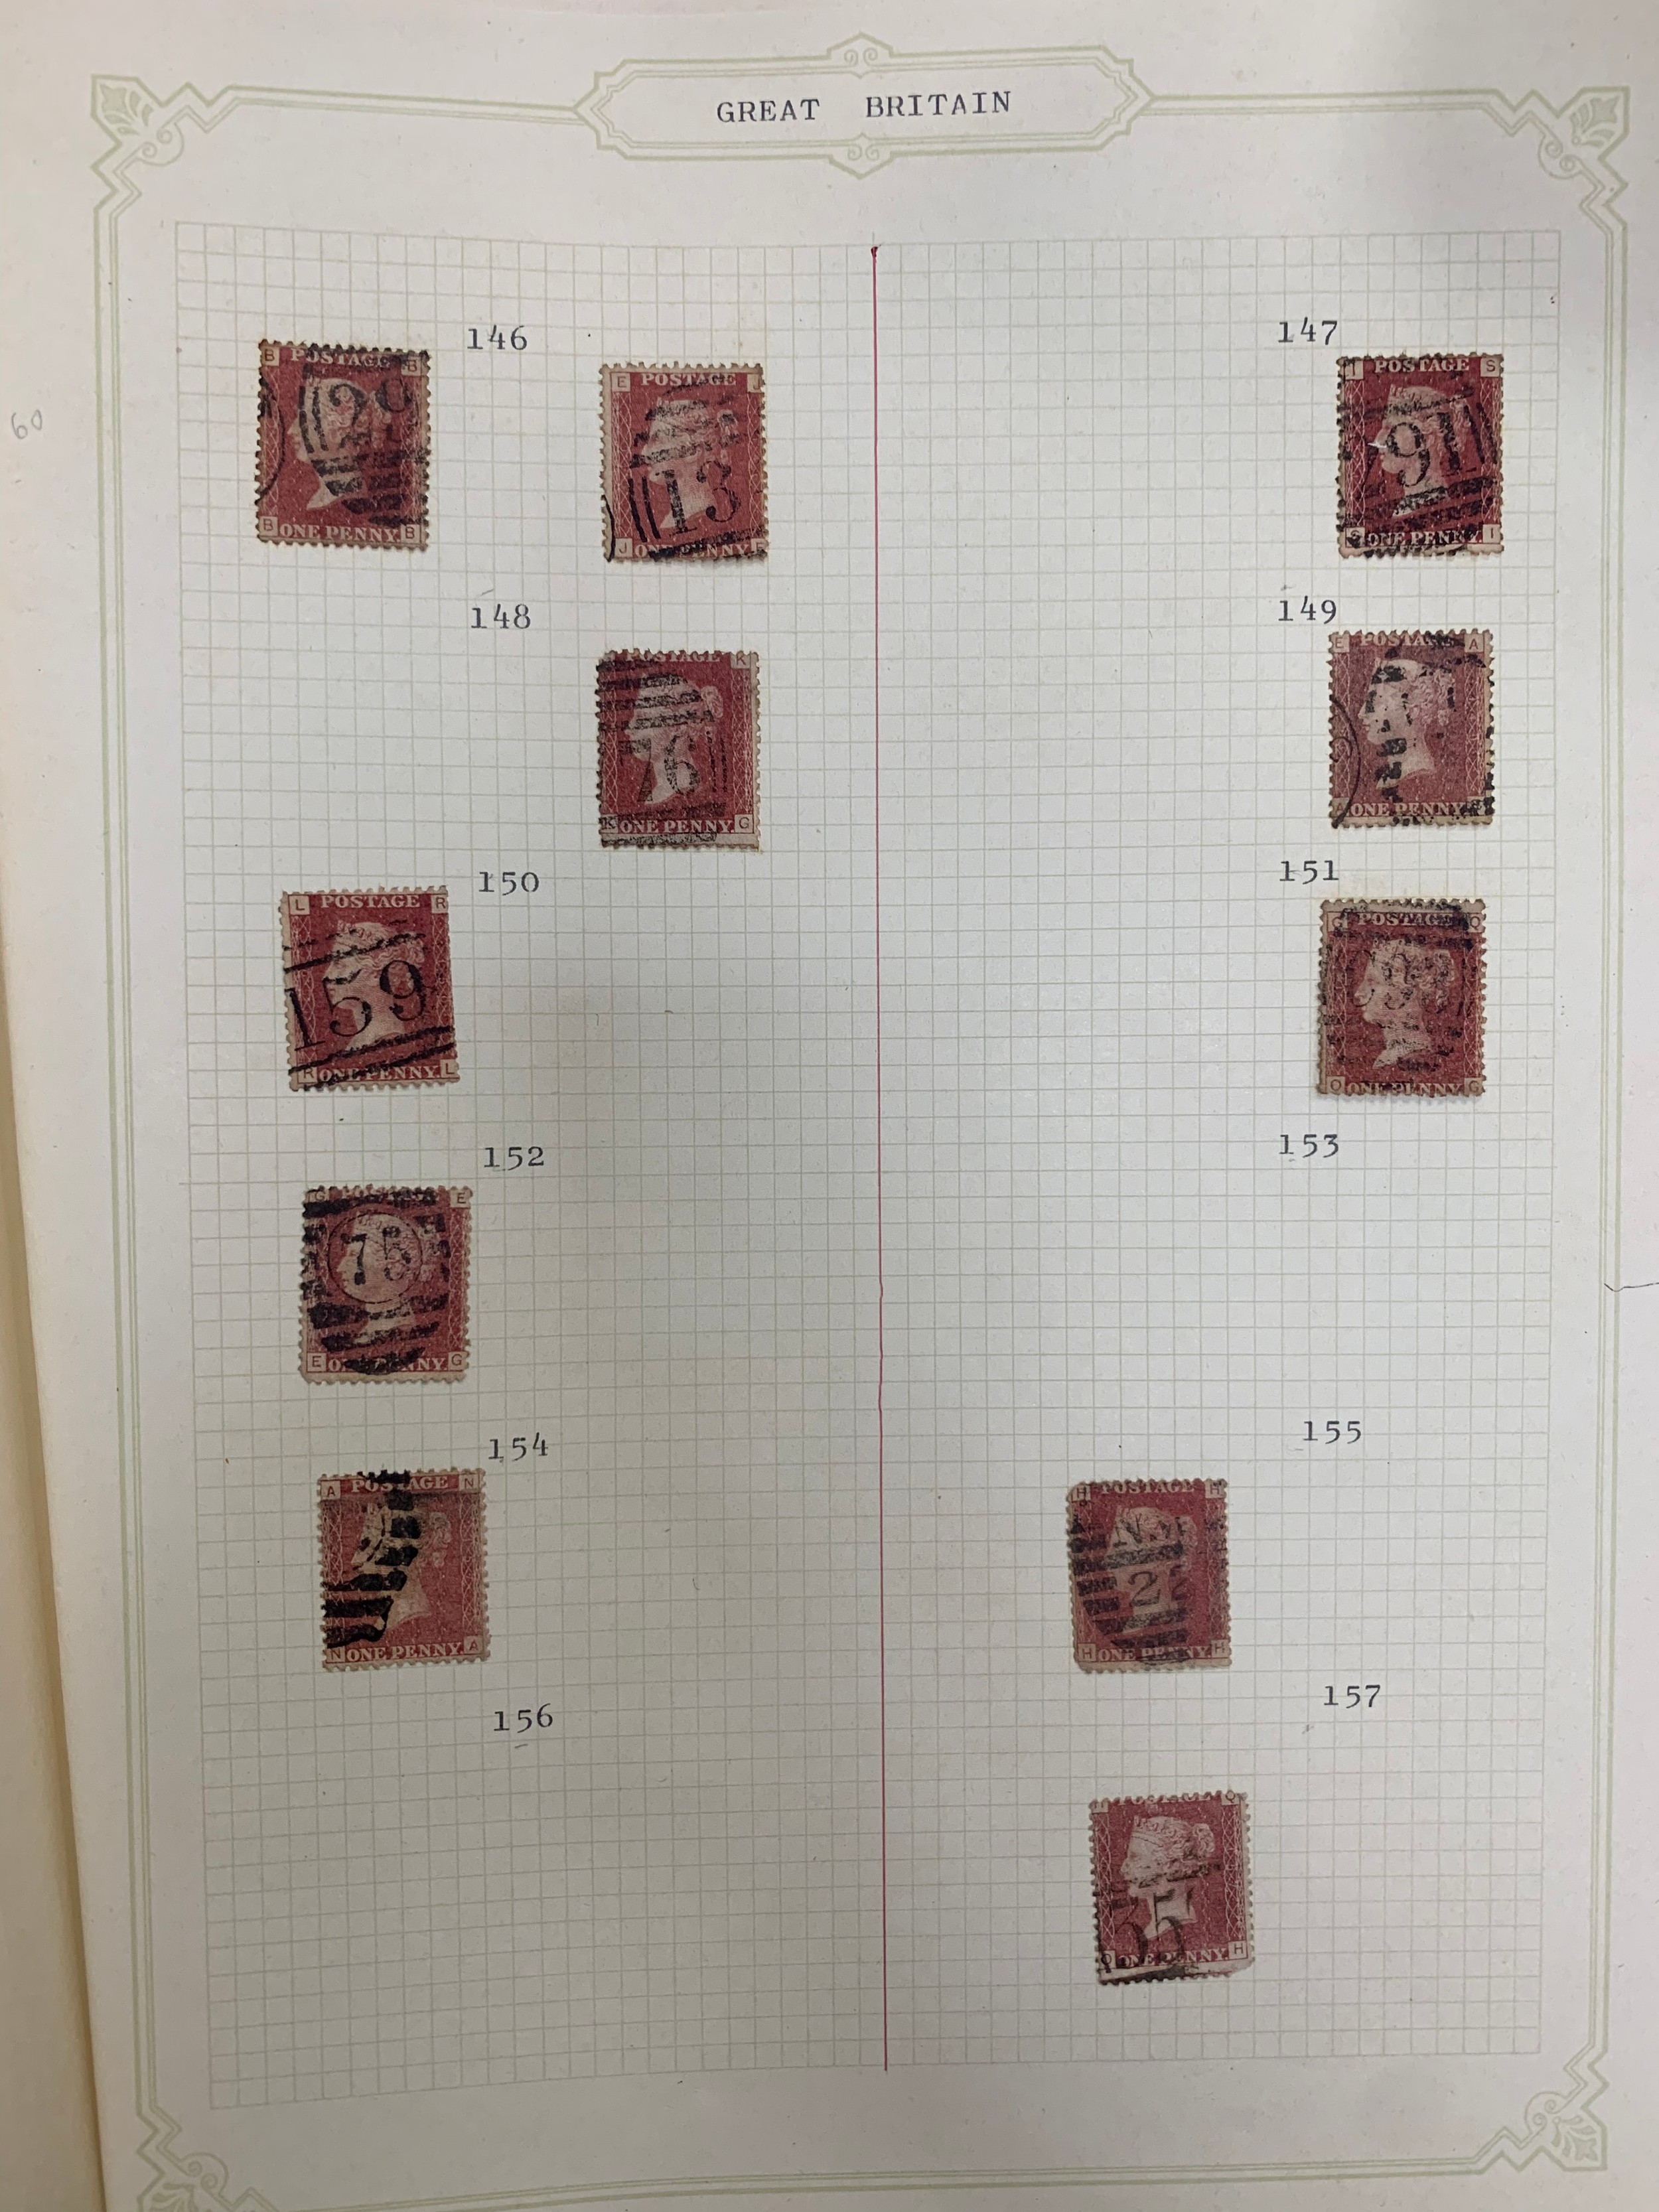 Great Britain, 1858-64 annotated and well-laid out collection of 1d Penny Reds FU from plate 73 to - Image 6 of 12